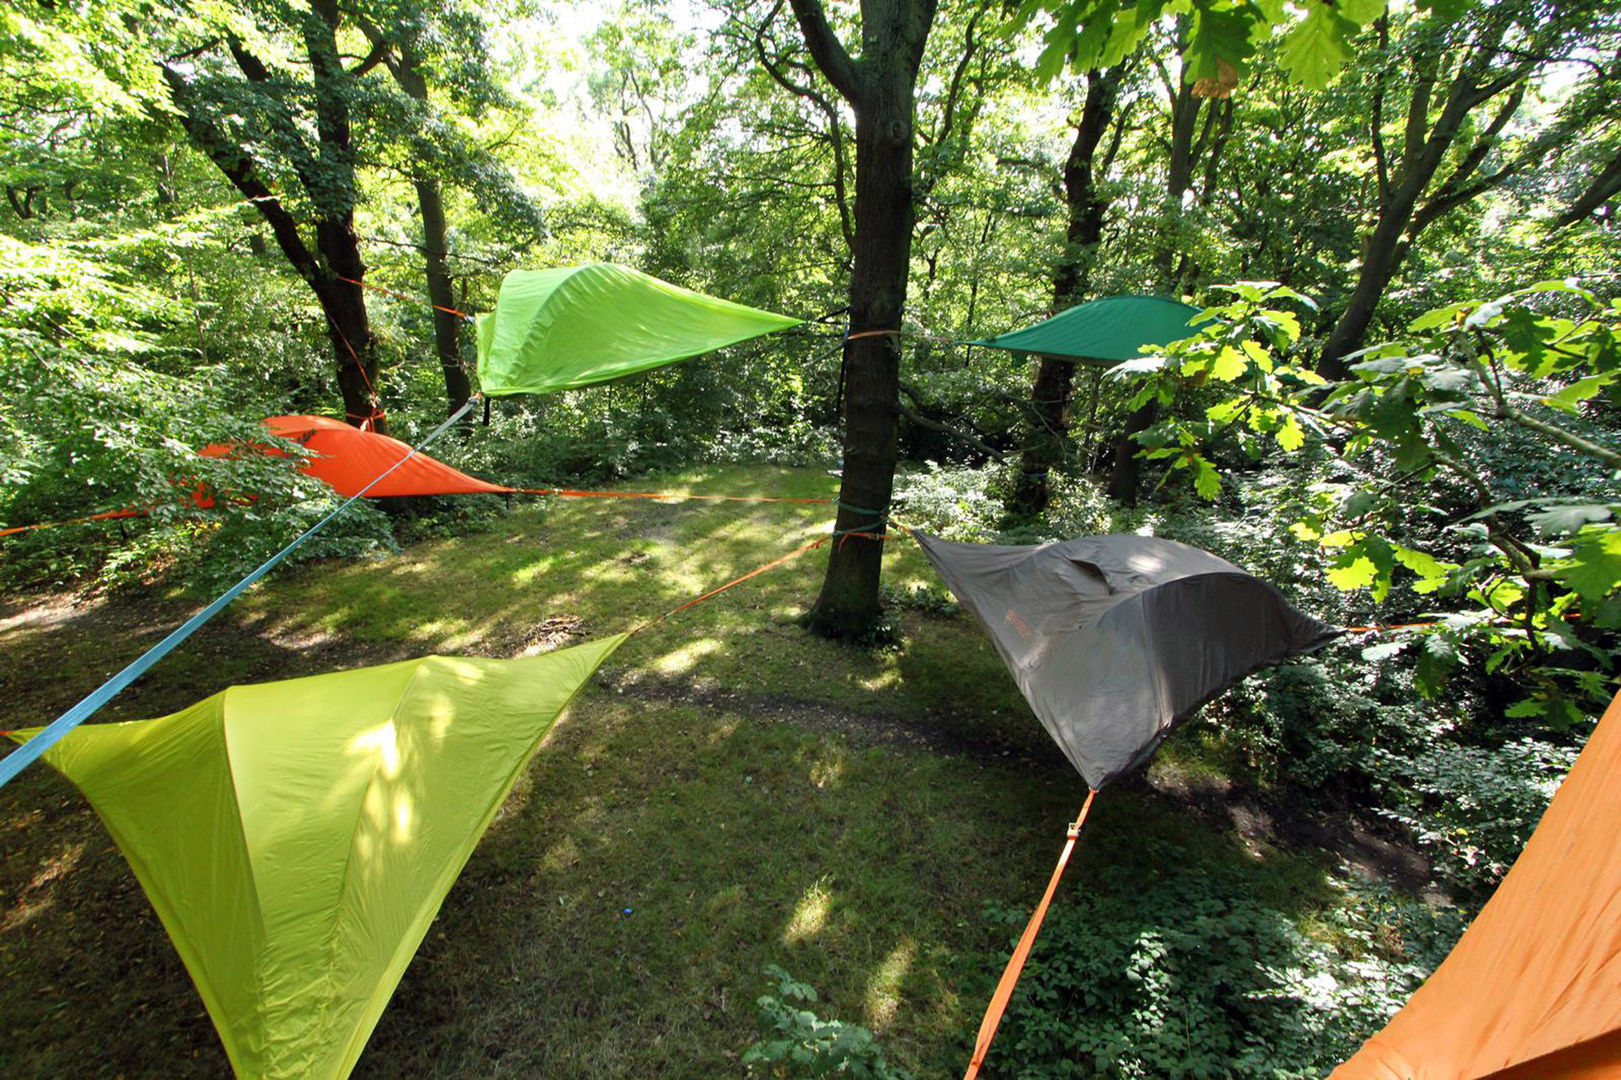 Add a New Touch to Your Camping Adventure with the Tentsile Stingray, Tentsile Tentsile Nowoczesny ogród Huśtawki i place zabaw